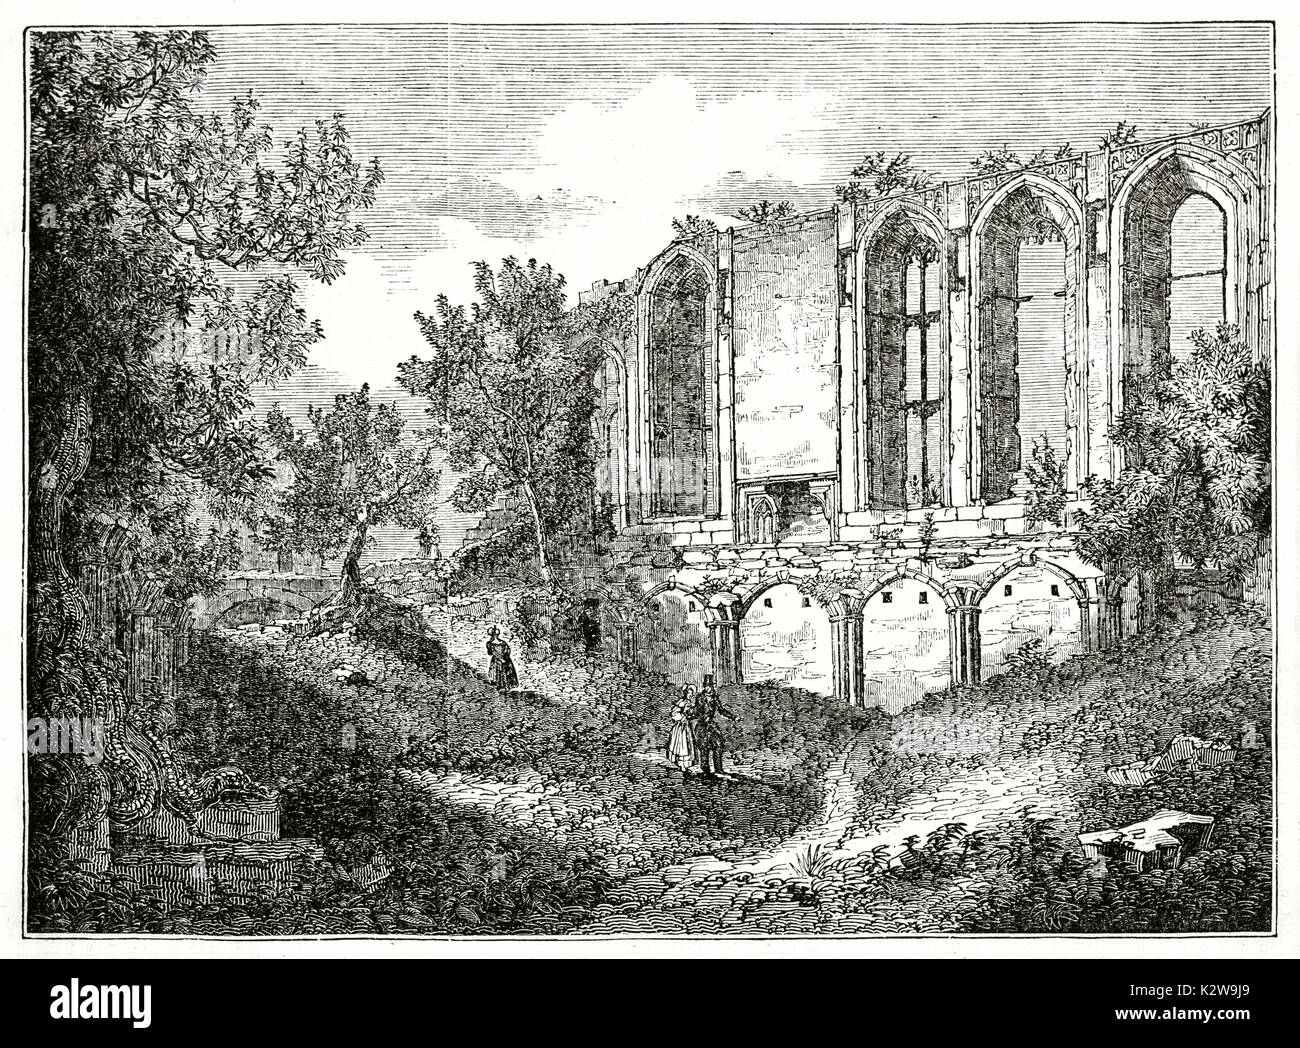 Old view of Great Hall, Kenilworth castle ruins, England. By unidentified author, published on the Penny Magazine, London, 1835 Stock Photo